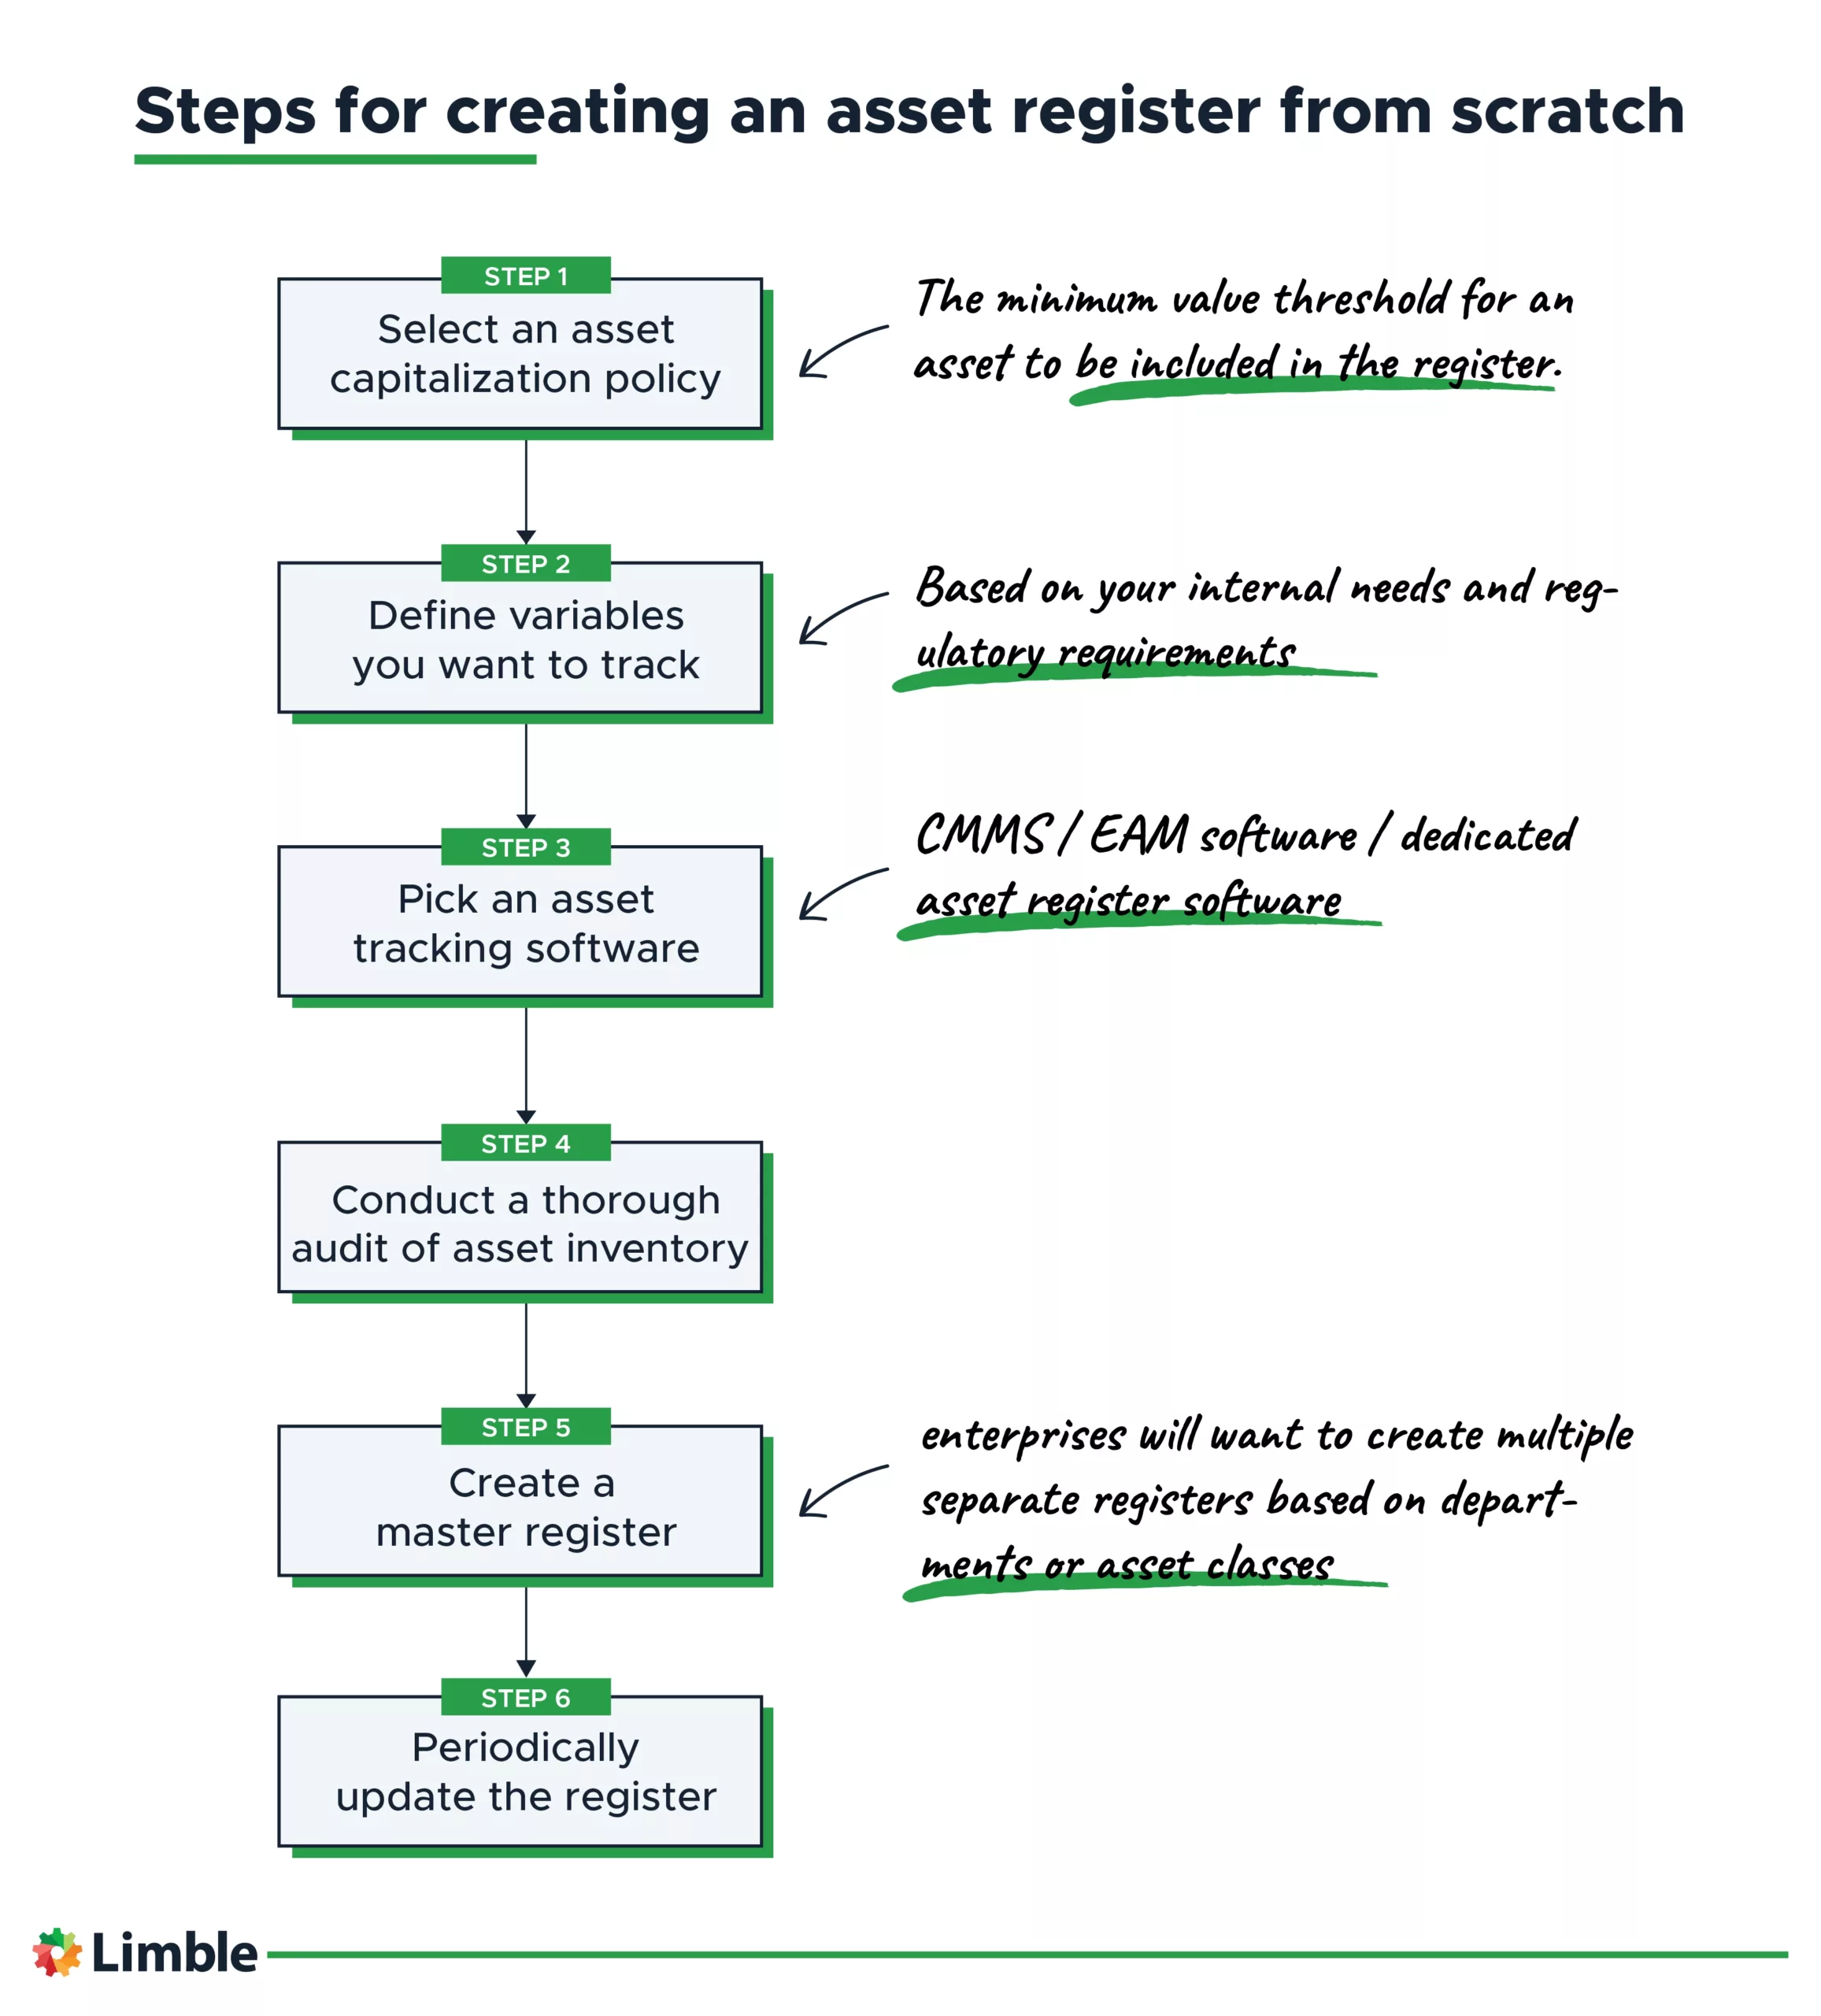 Steps for creating an asset register from scratch.